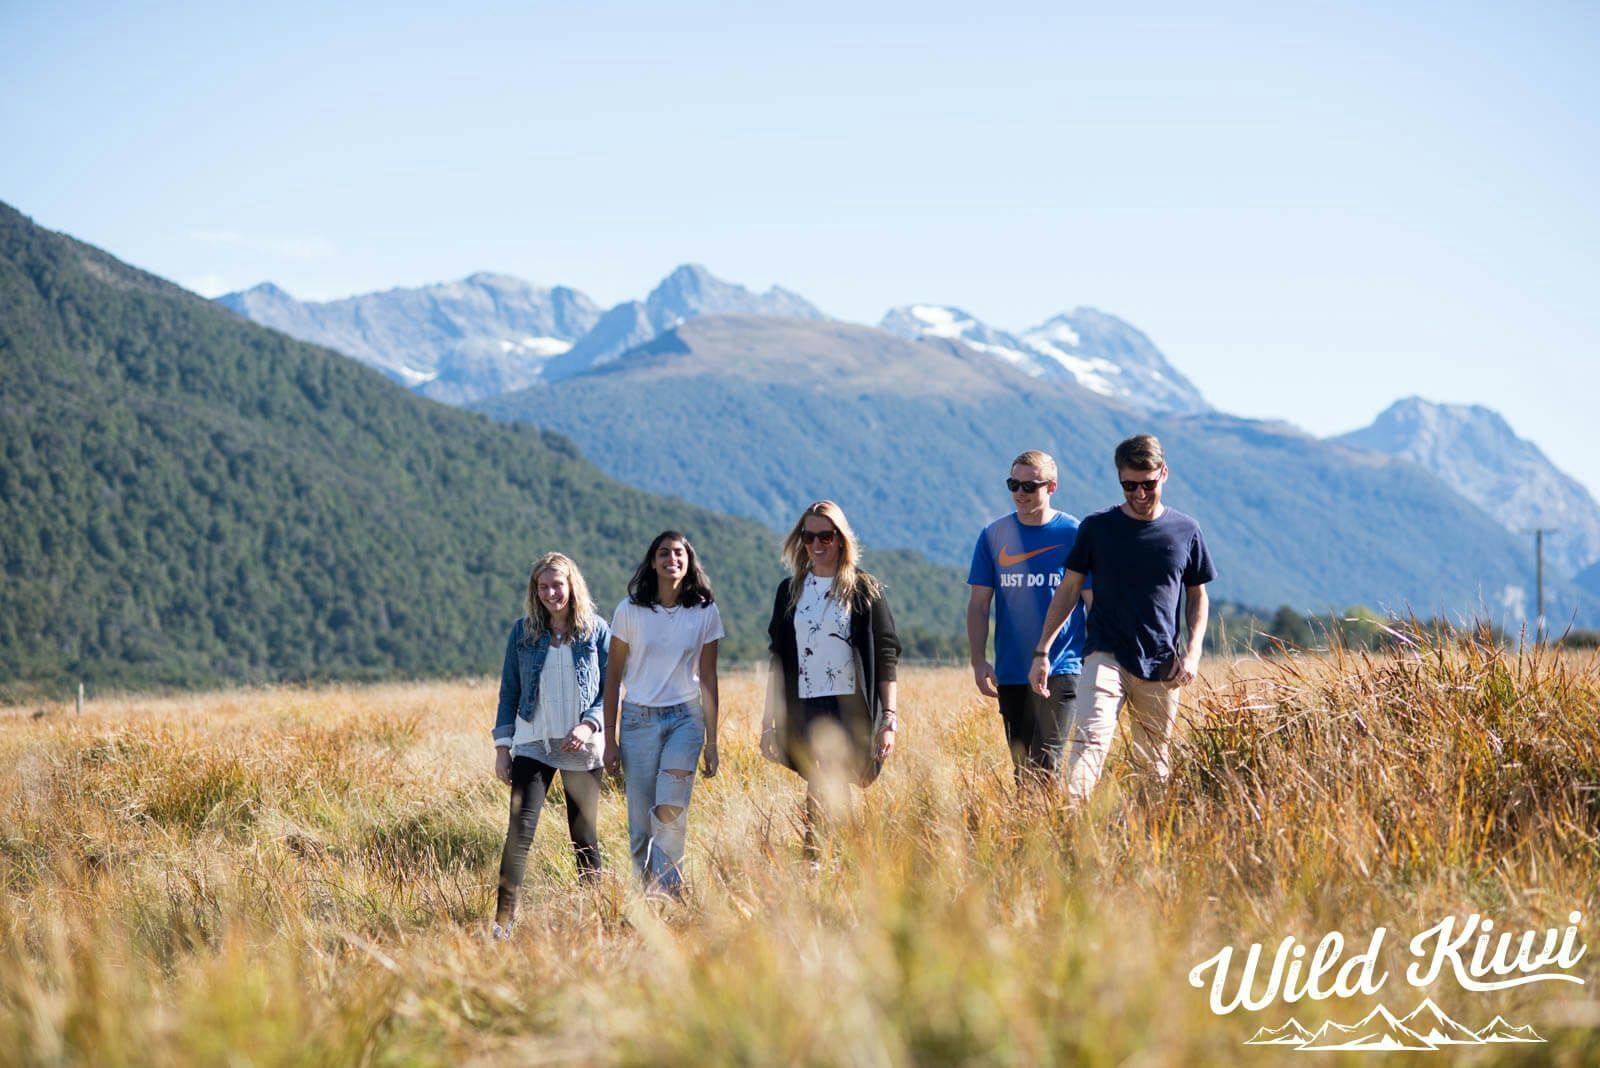 Forming friendships on a New Zealand road trip - One of the best reasons to book